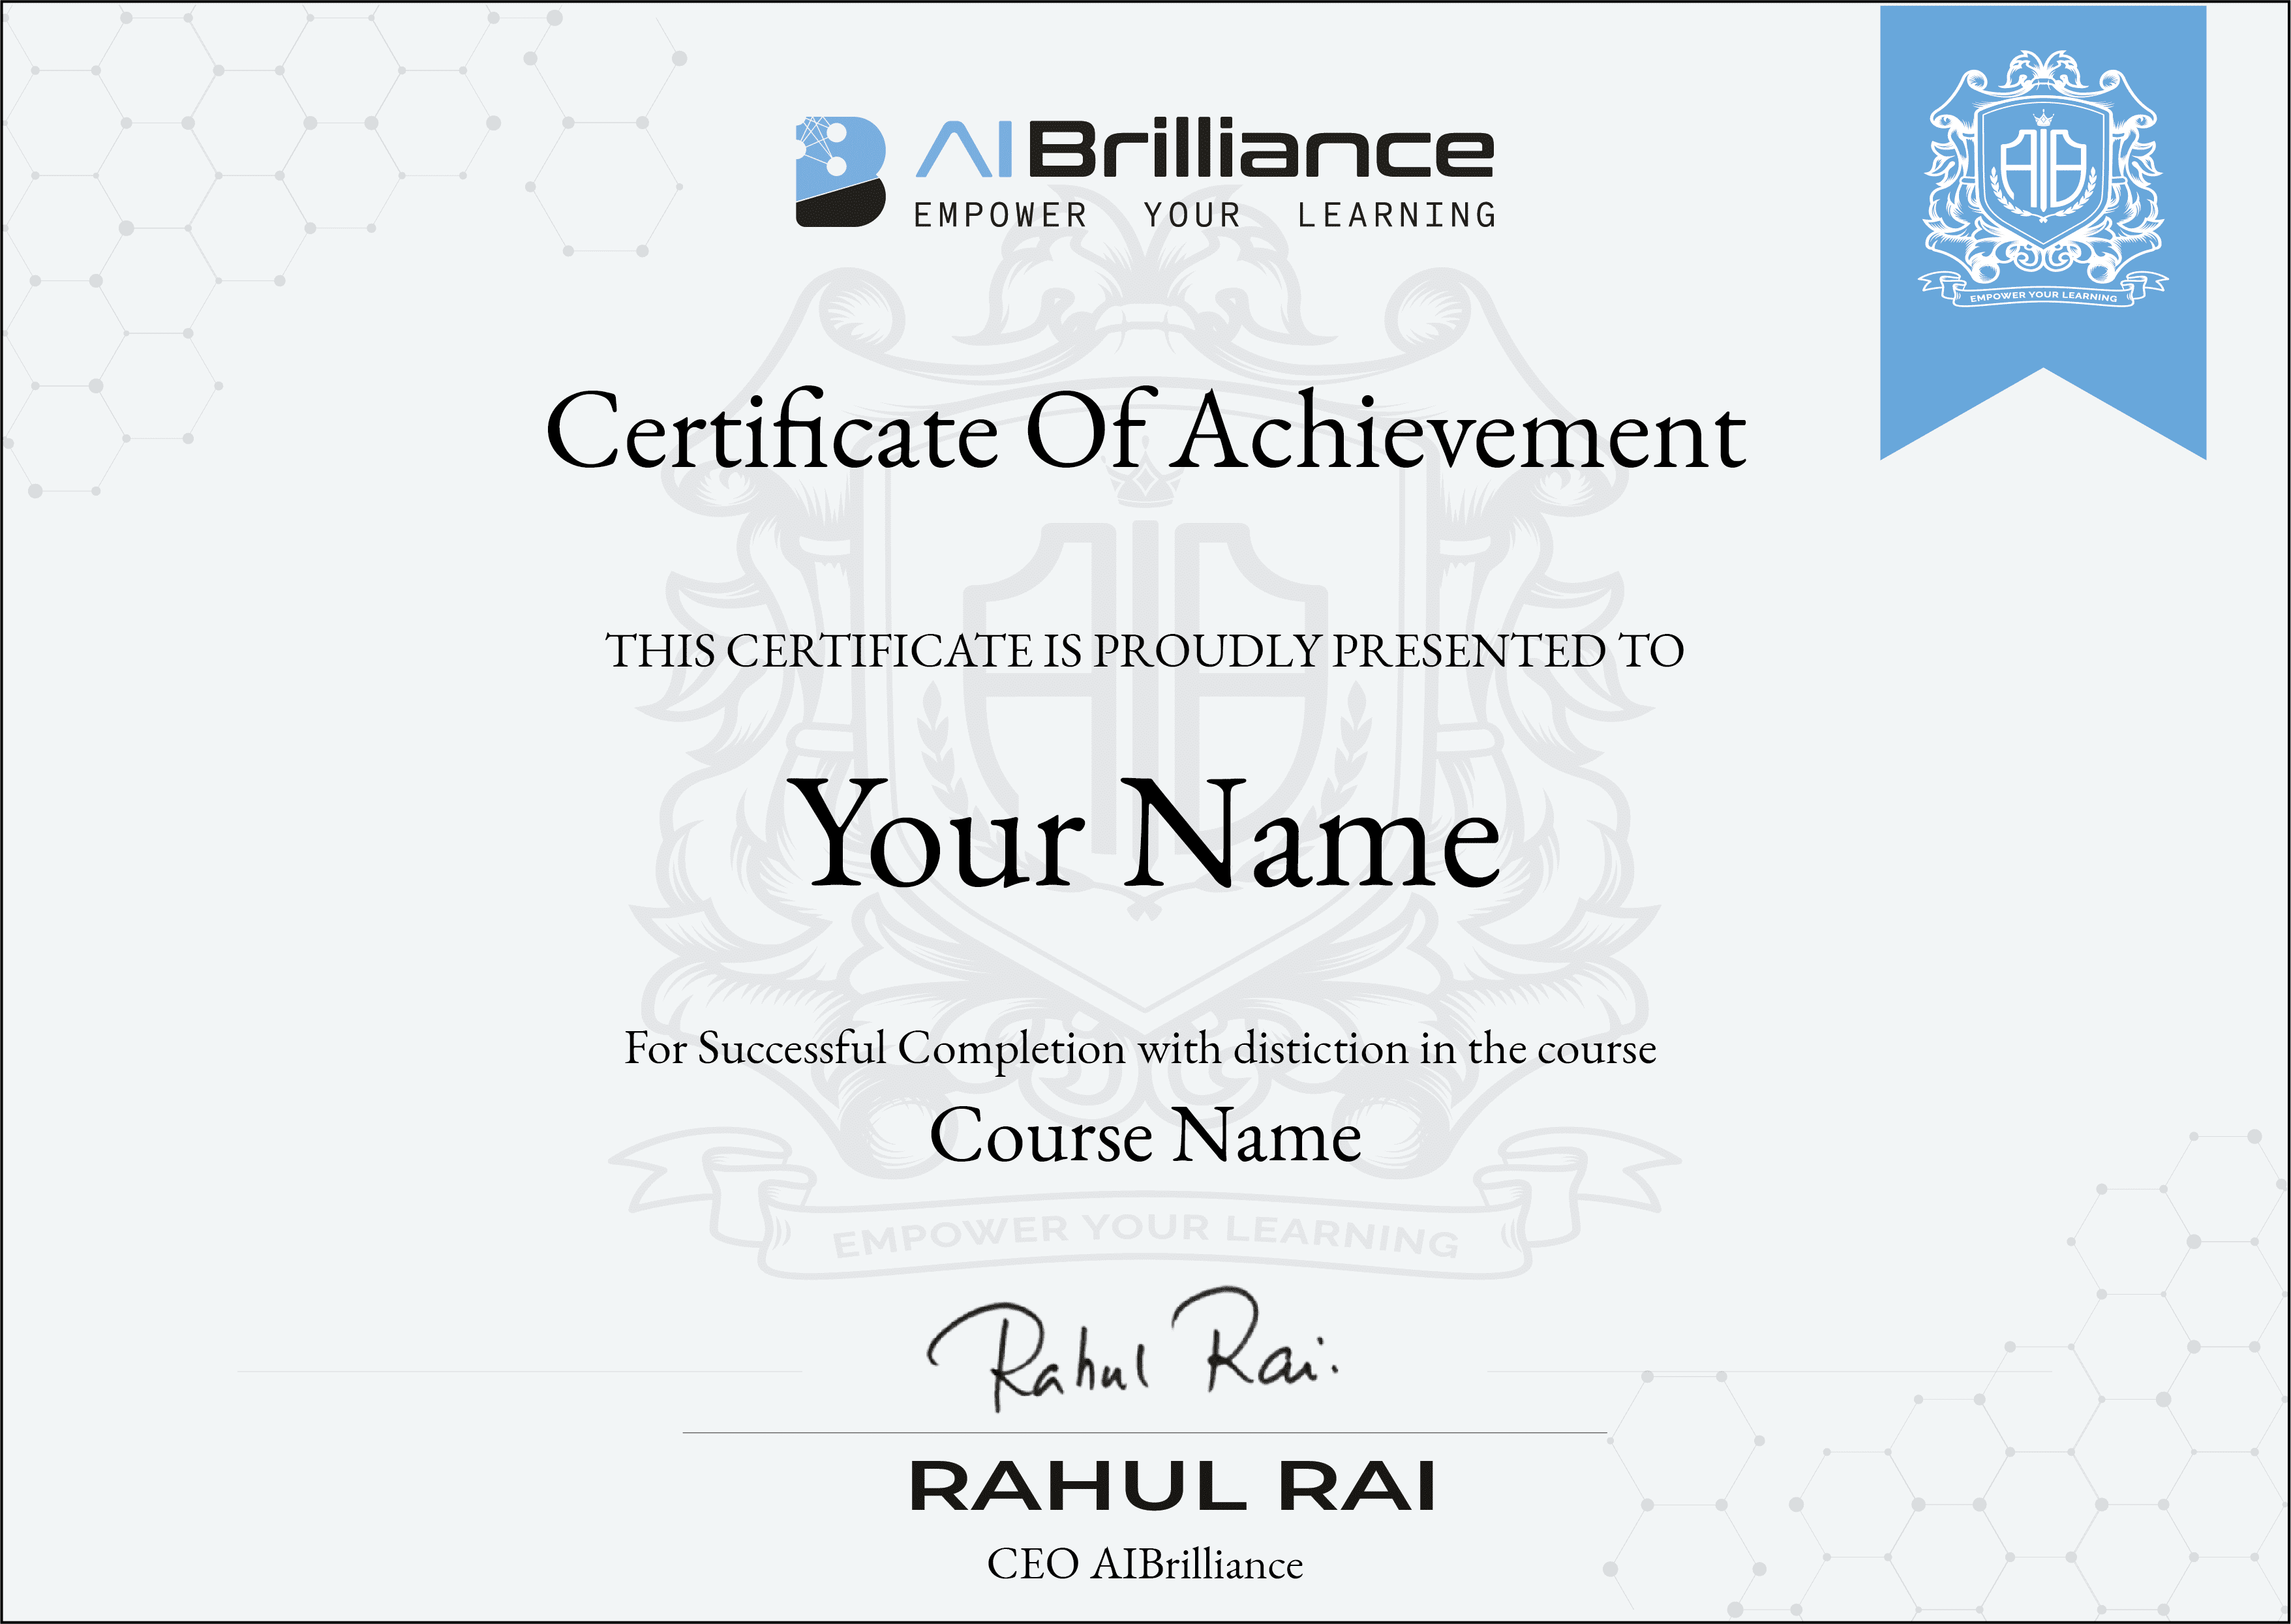 data science machine learning artificial intelligence certificate AIBrilliance